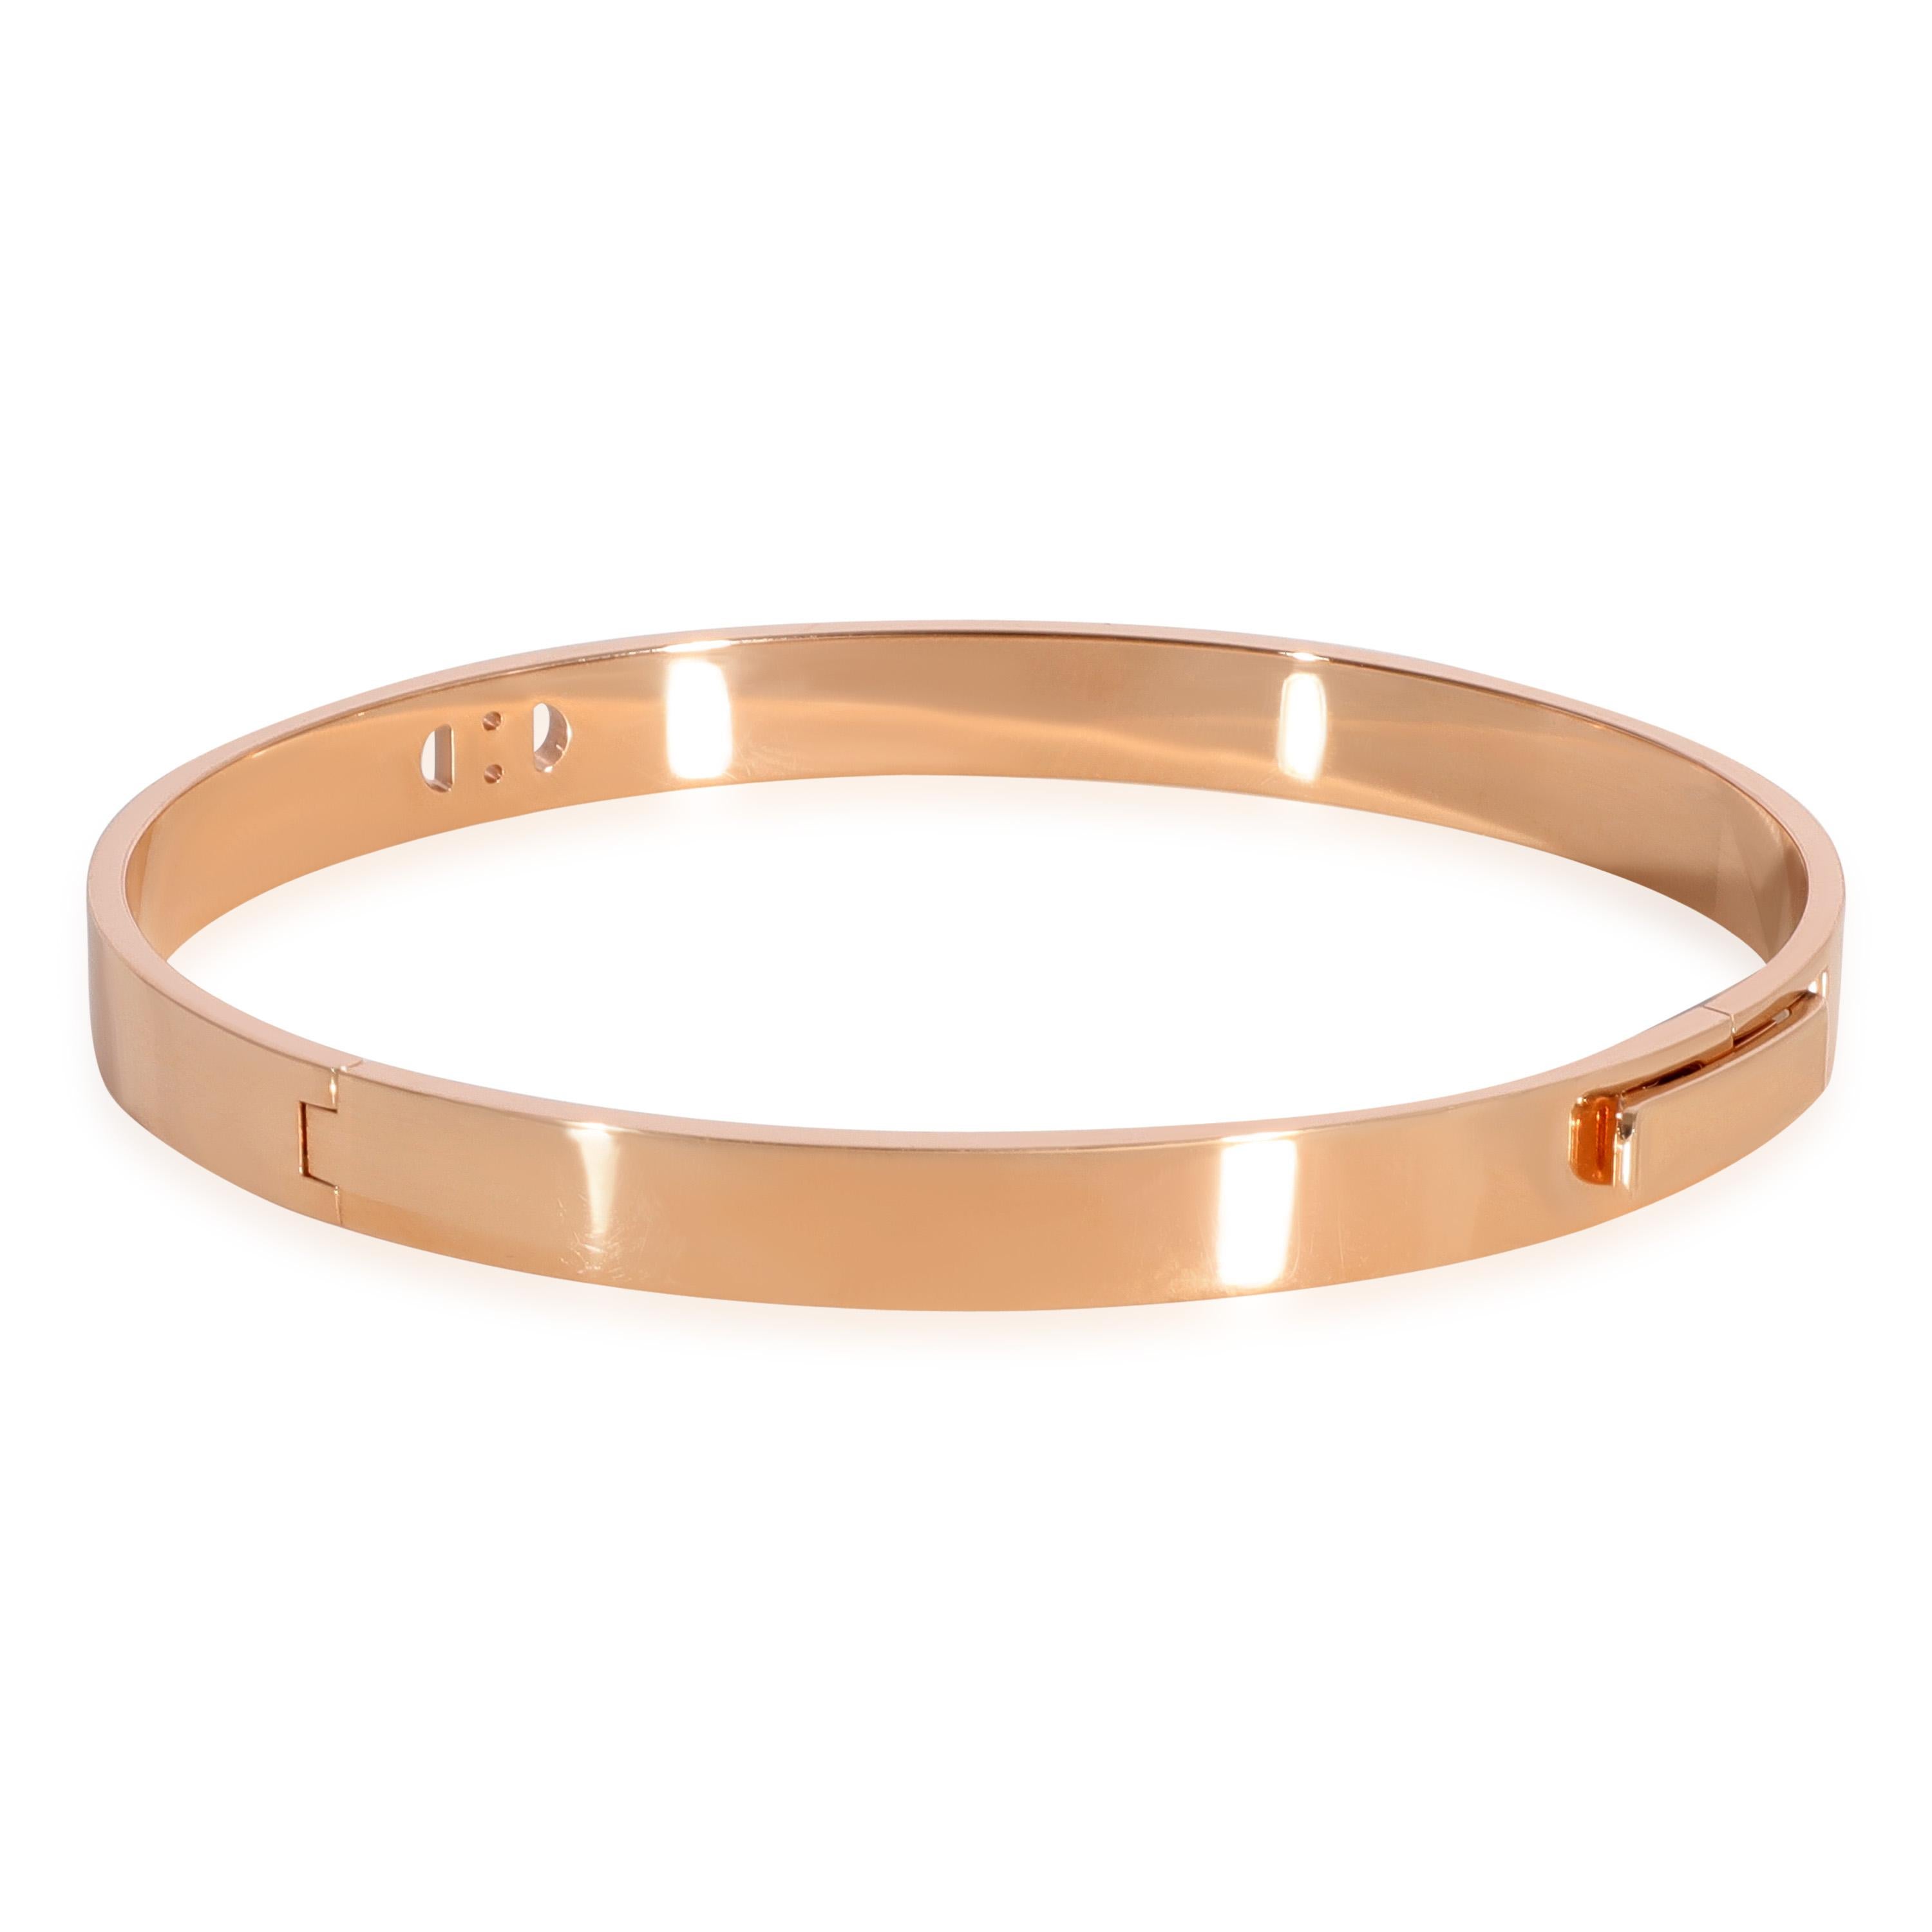 Hermès Diamond Bangle in 18k Rose Gold 0.07 CTW

PRIMARY DETAILS
SKU: 124414
Listing Title: Hermès Diamond Bangle in 18k Rose Gold 0.07 CTW
Condition Description: Retails for 6950 USD. In excellent condition. 6 inches in length. Comes with